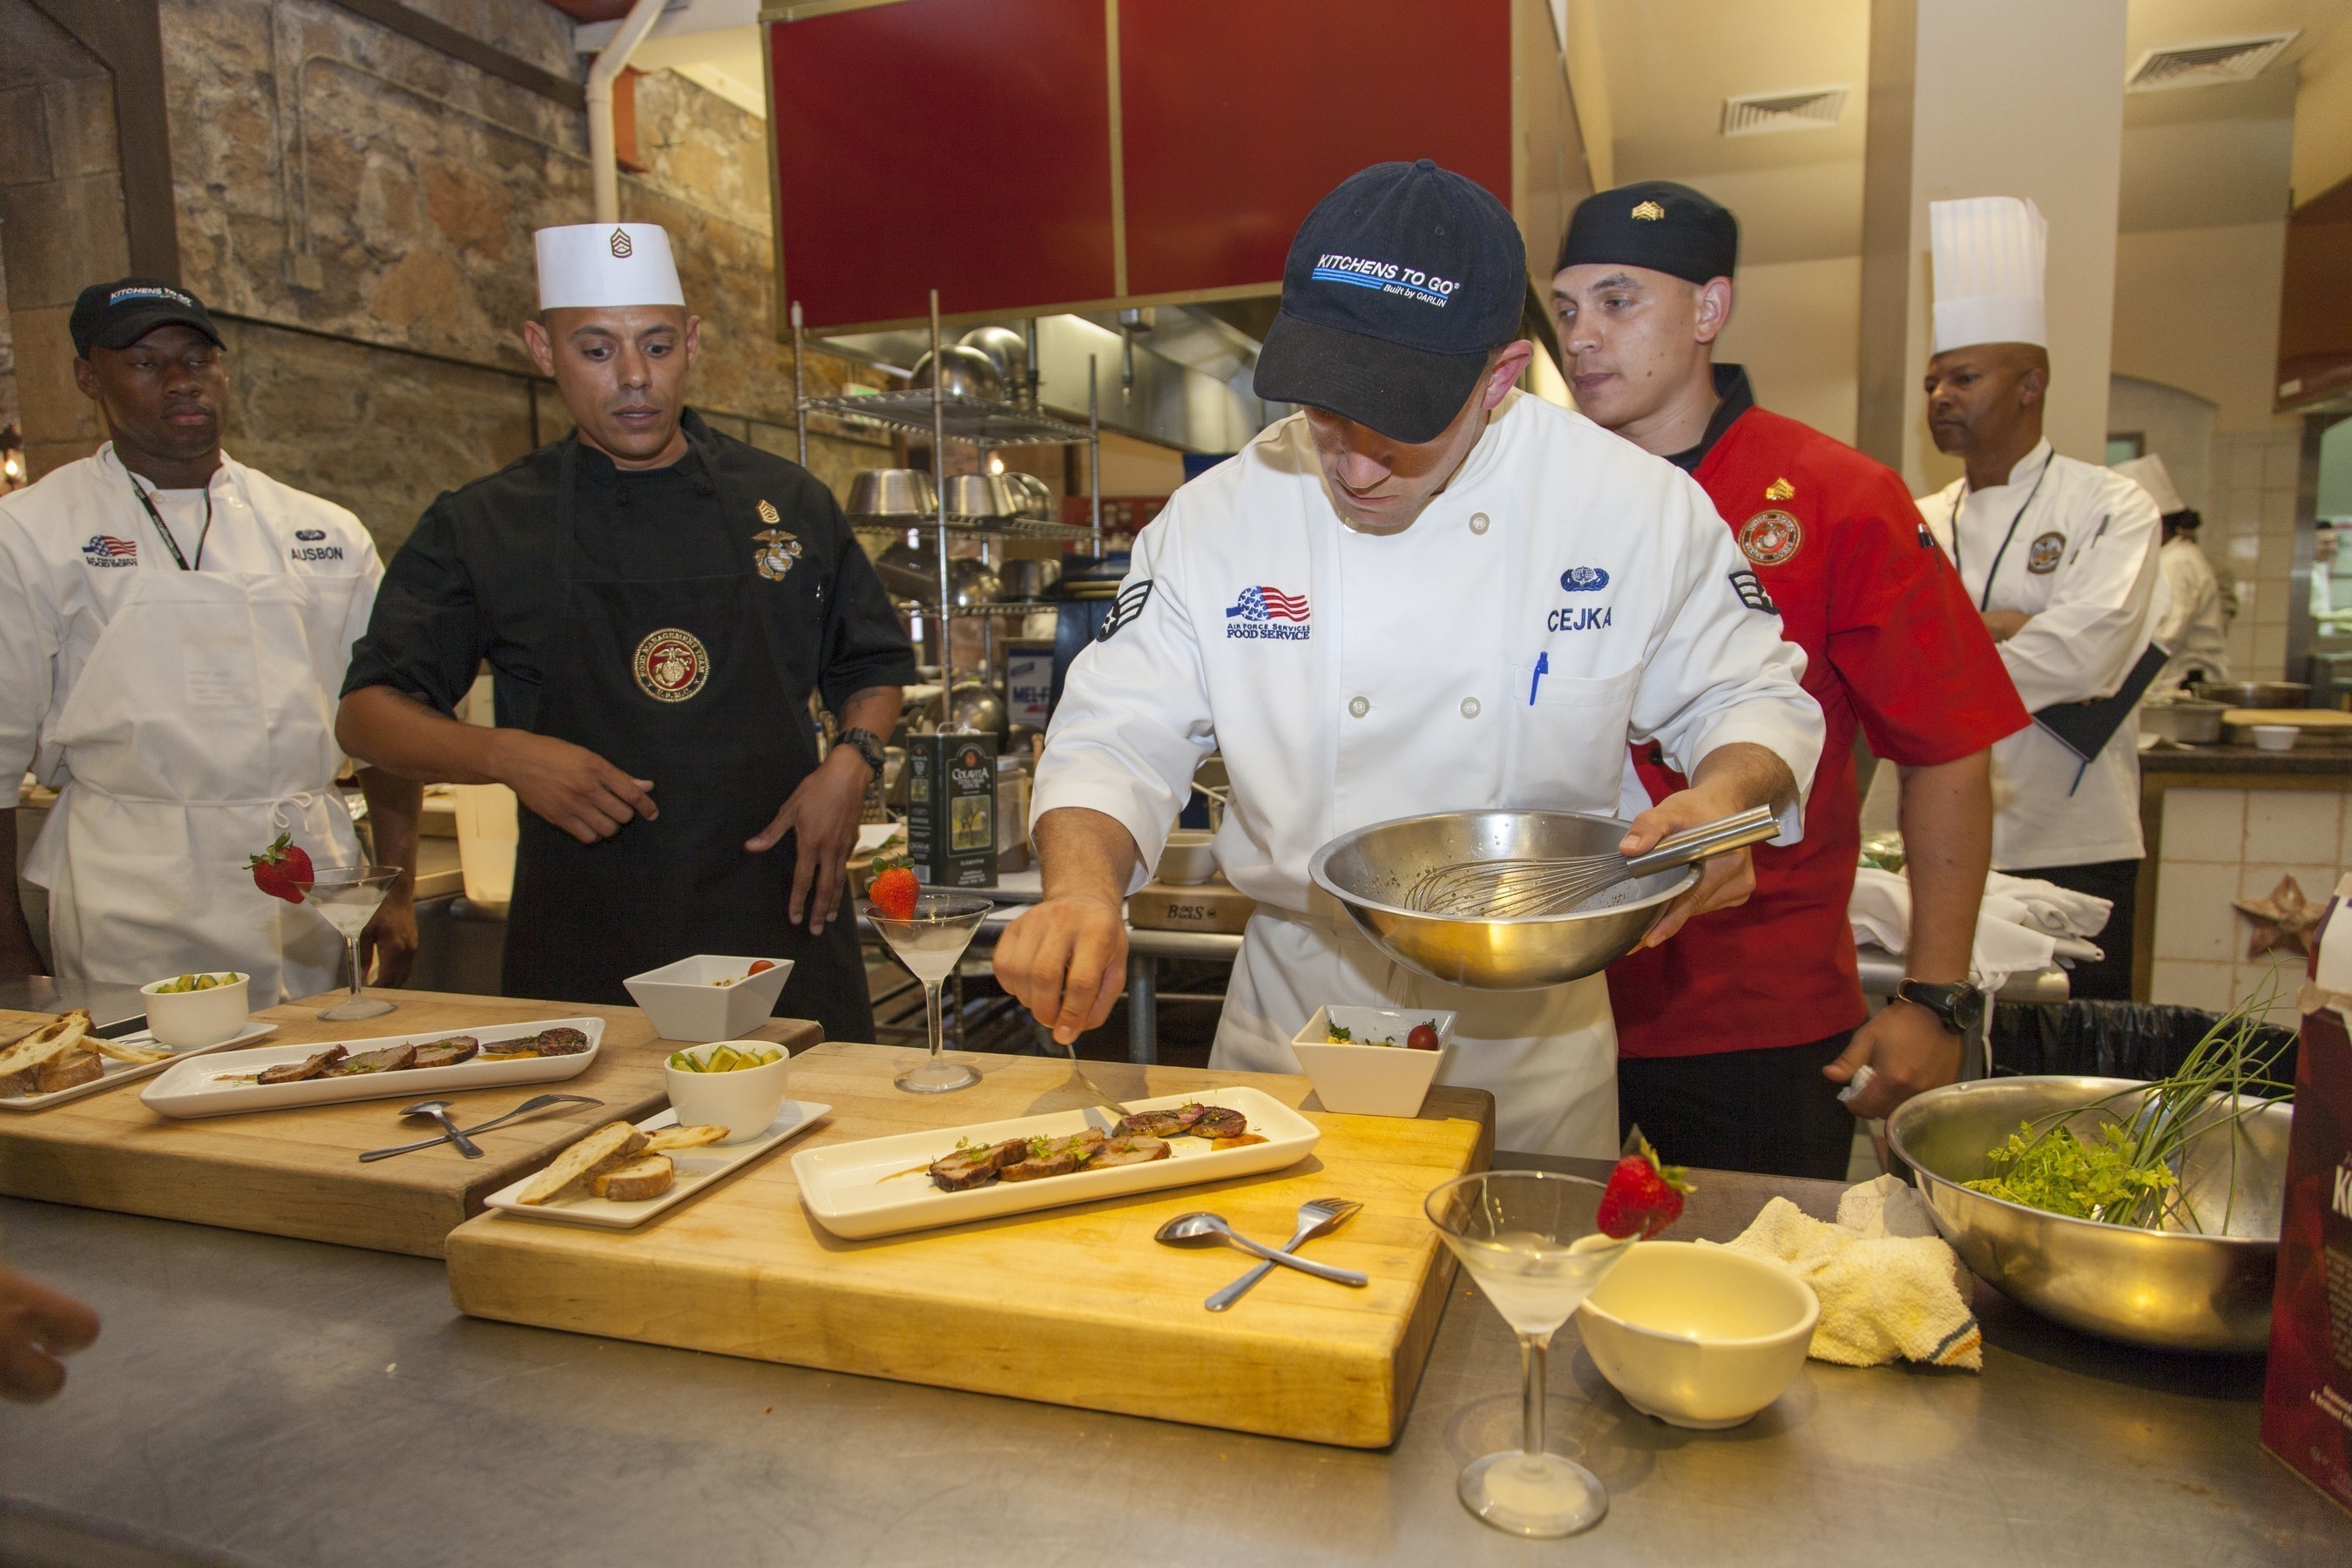 Senior Airman Caleb Cejka puts the finishing touches on his team's recipe challenge dish at the 2016 Armed Forces Forum for Culinary Excellence, hosted at The Culinary Institute of America at Greystone, in California.